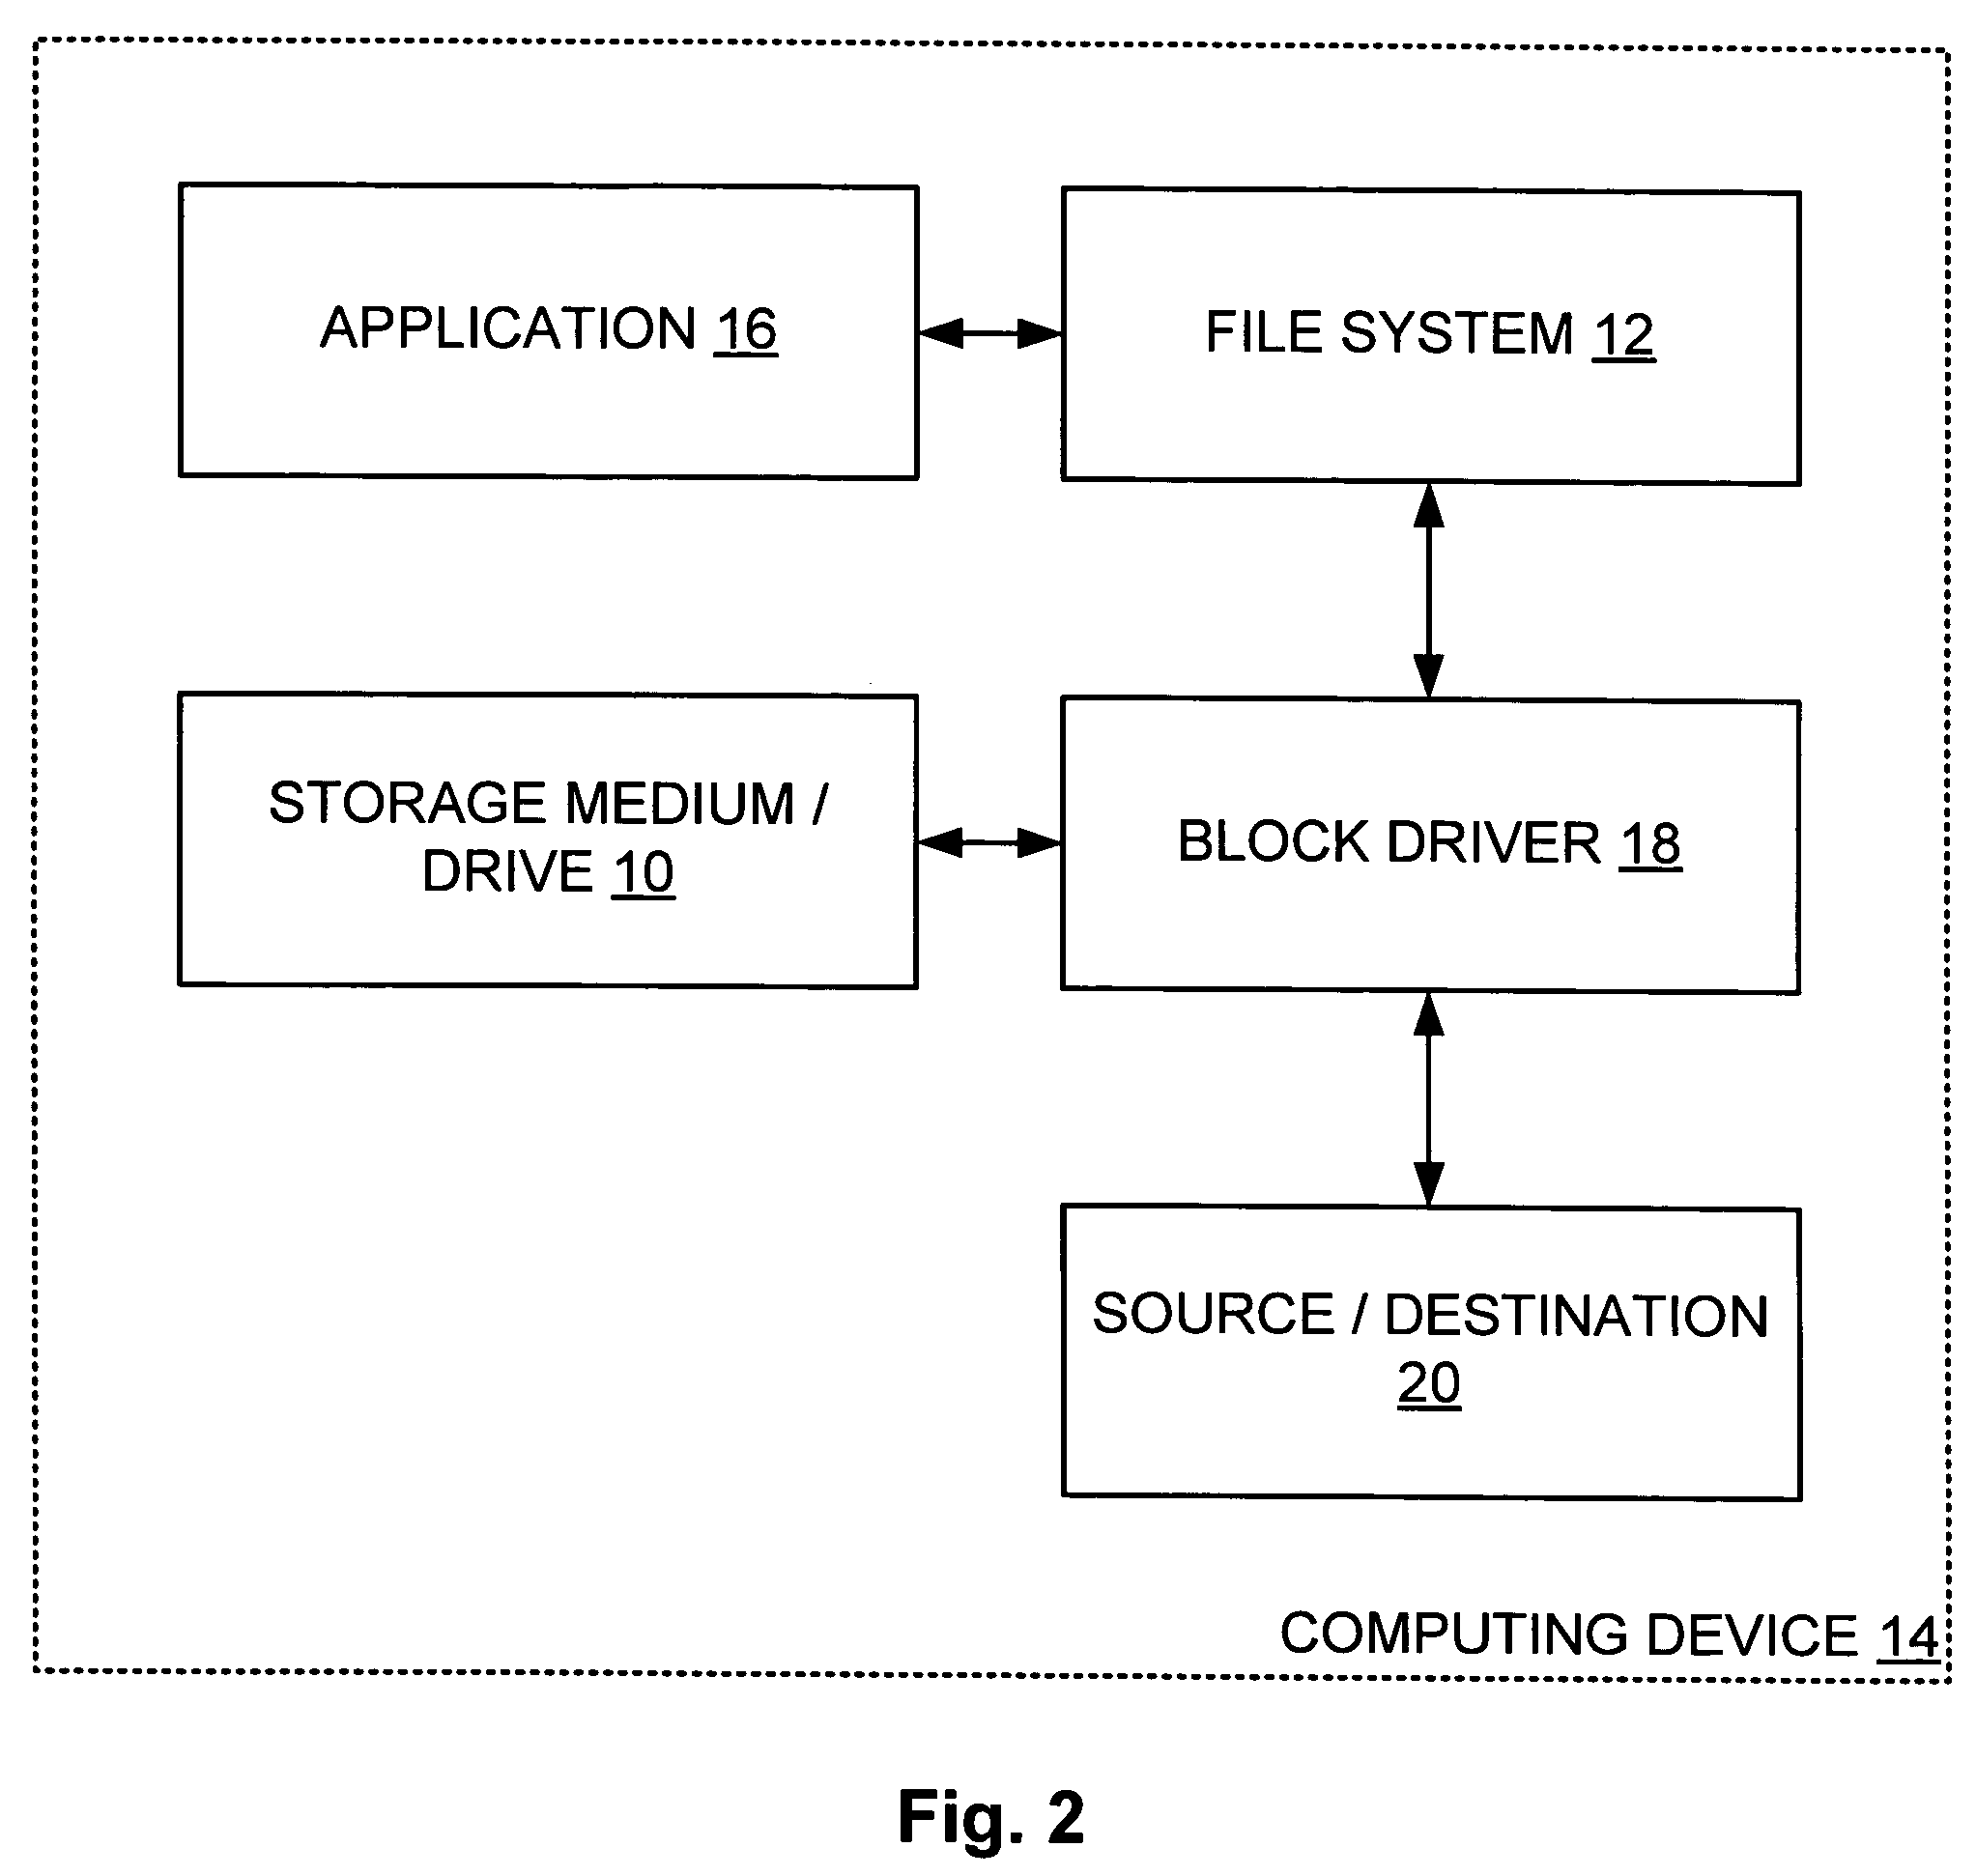 Efficient data transfer to/from storage medium of computing device